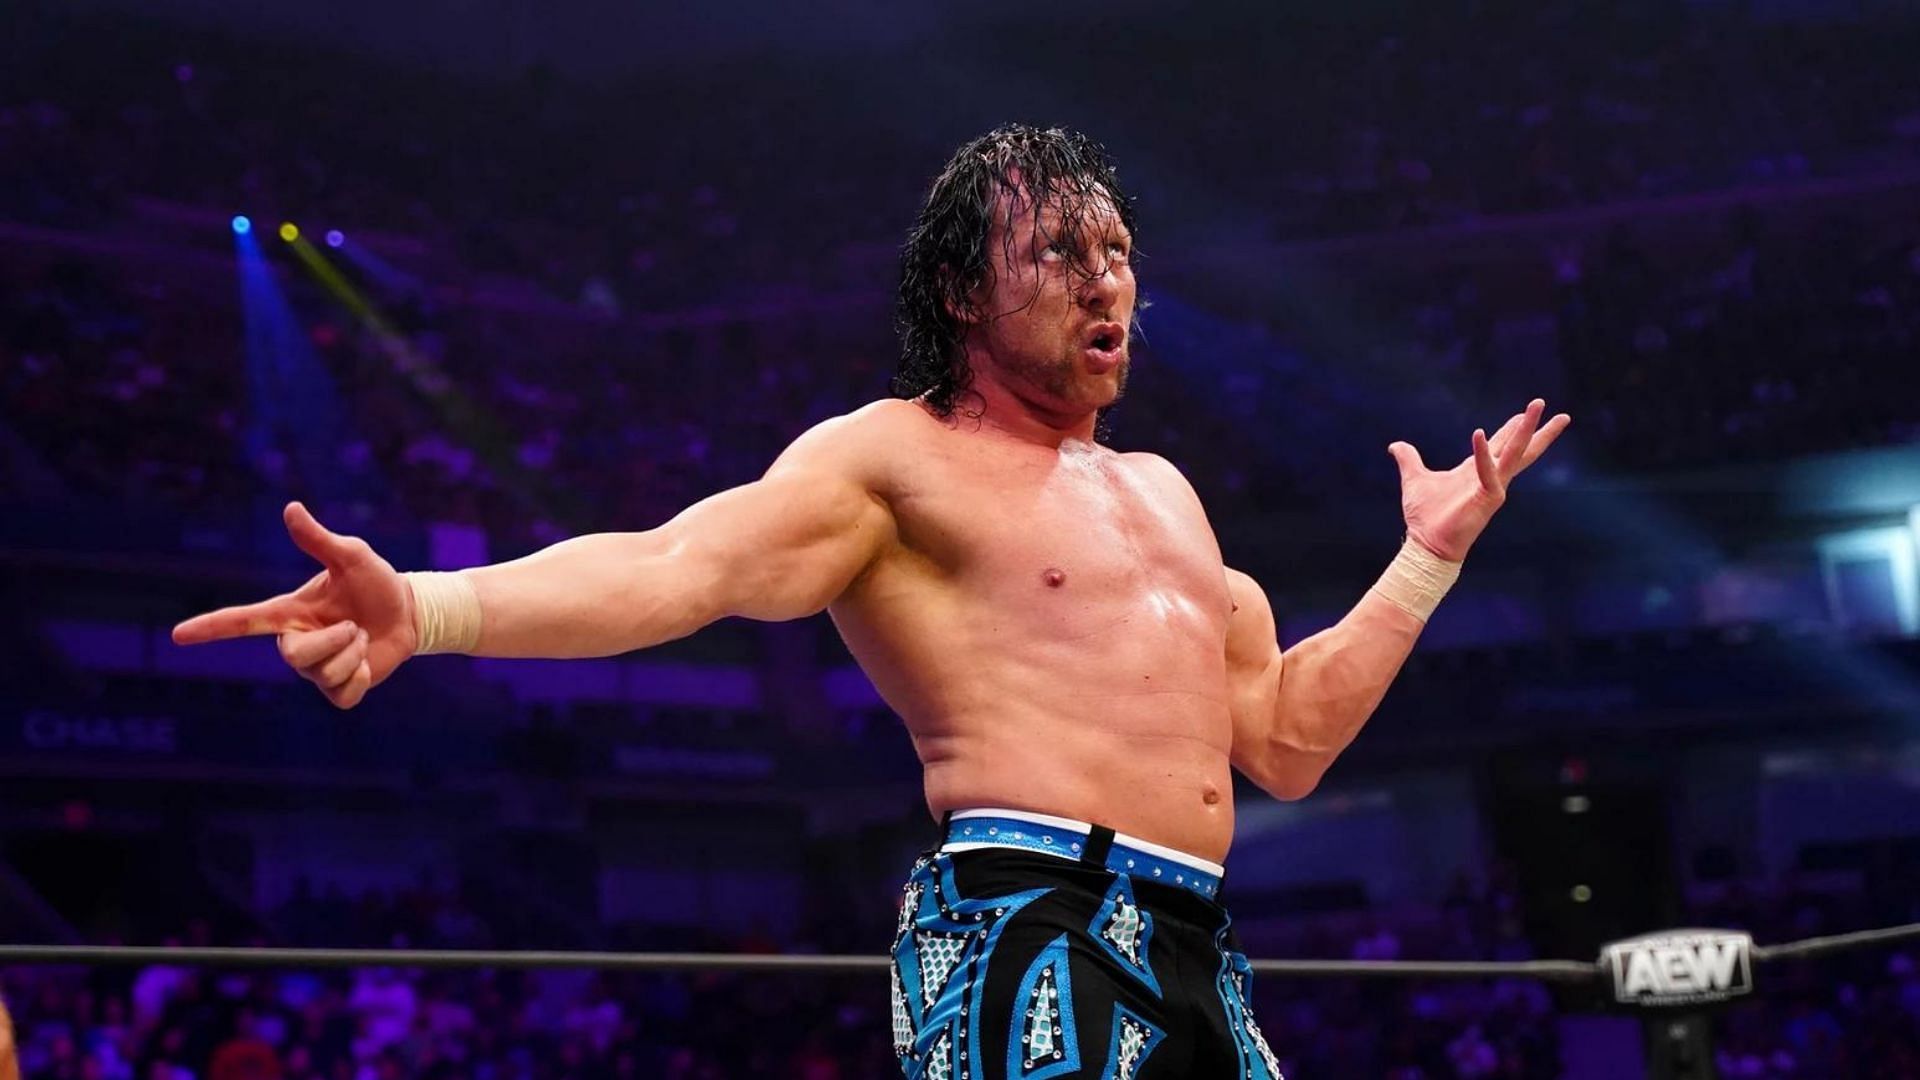 Kenny Omega at the &quot;Grand Slam&quot; edition of AEW Dynamite in 2021